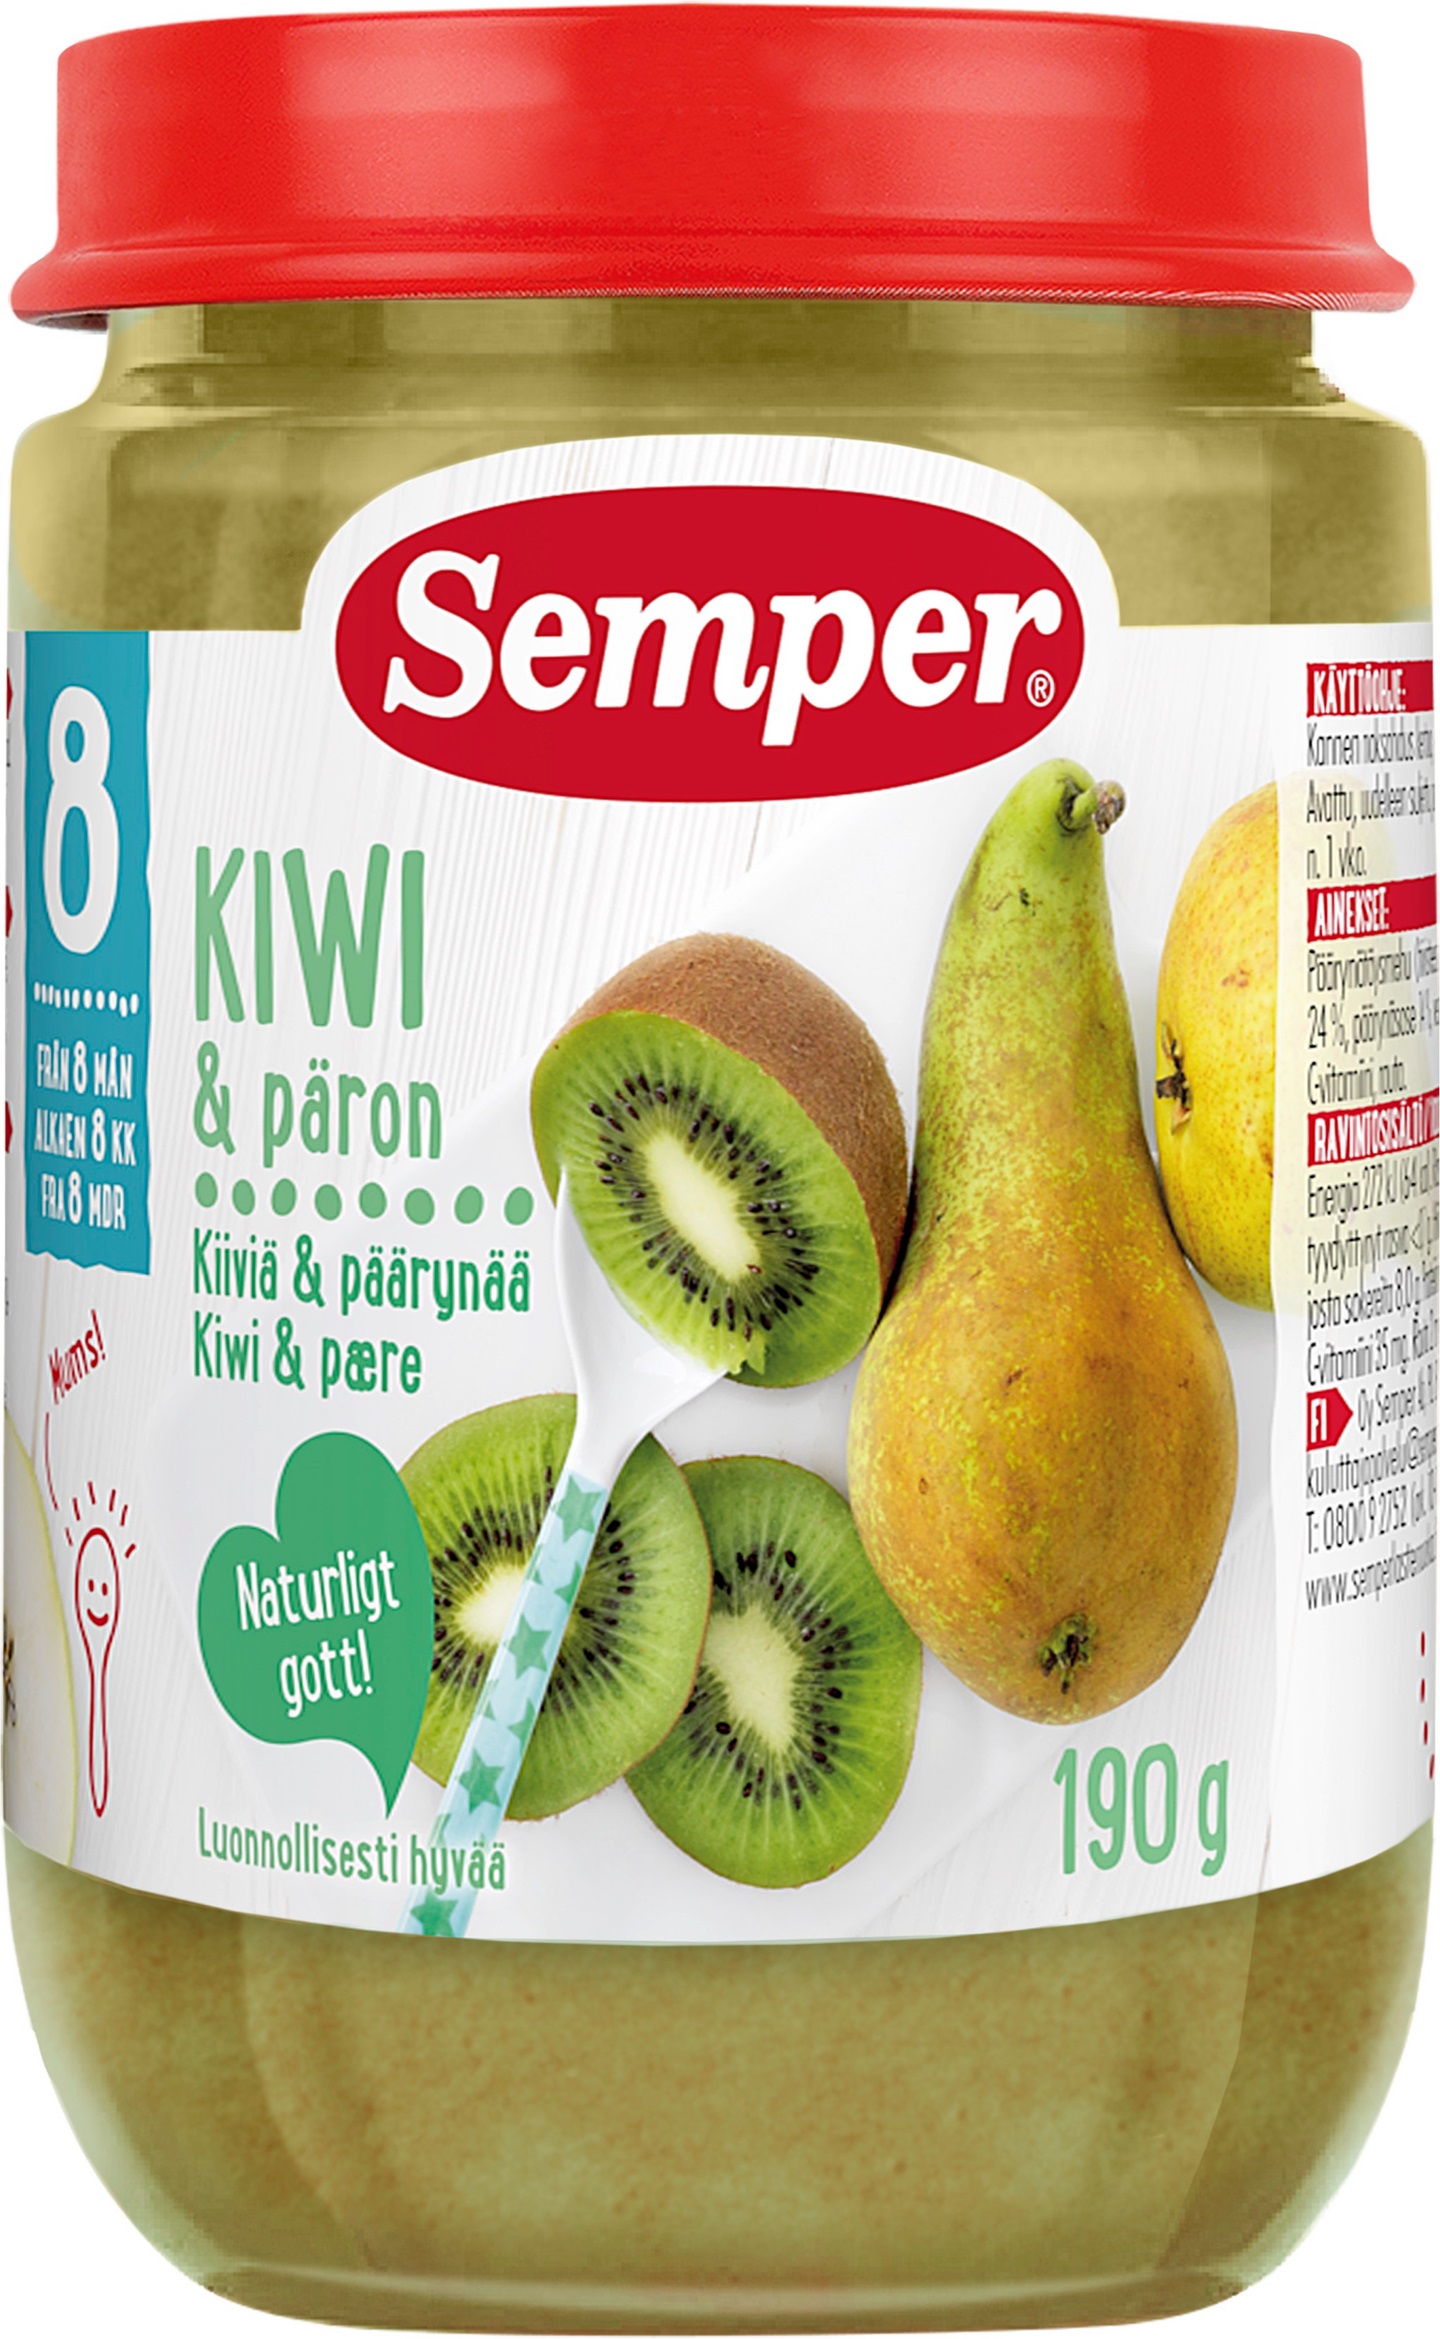 Semper kiwi and pear from190g 8 months 